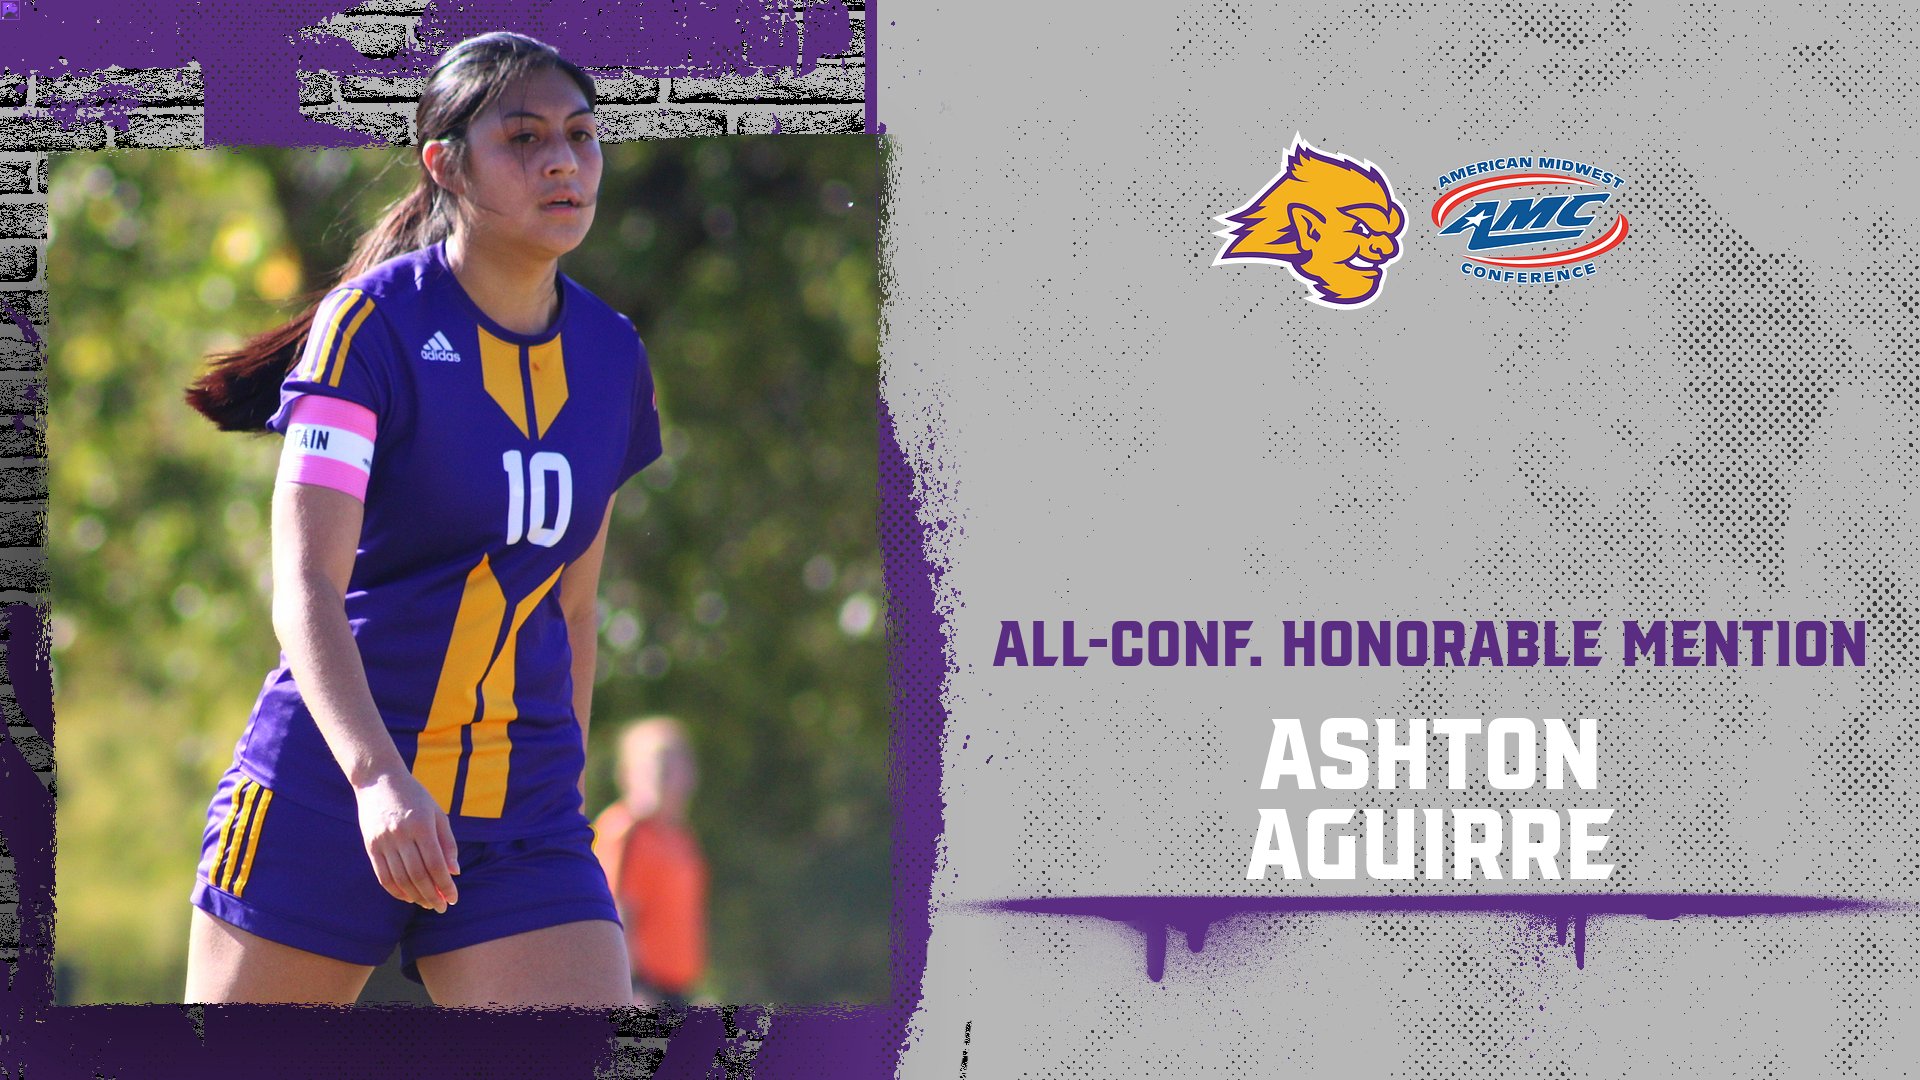 Aguirre named to AMC All-Conference team